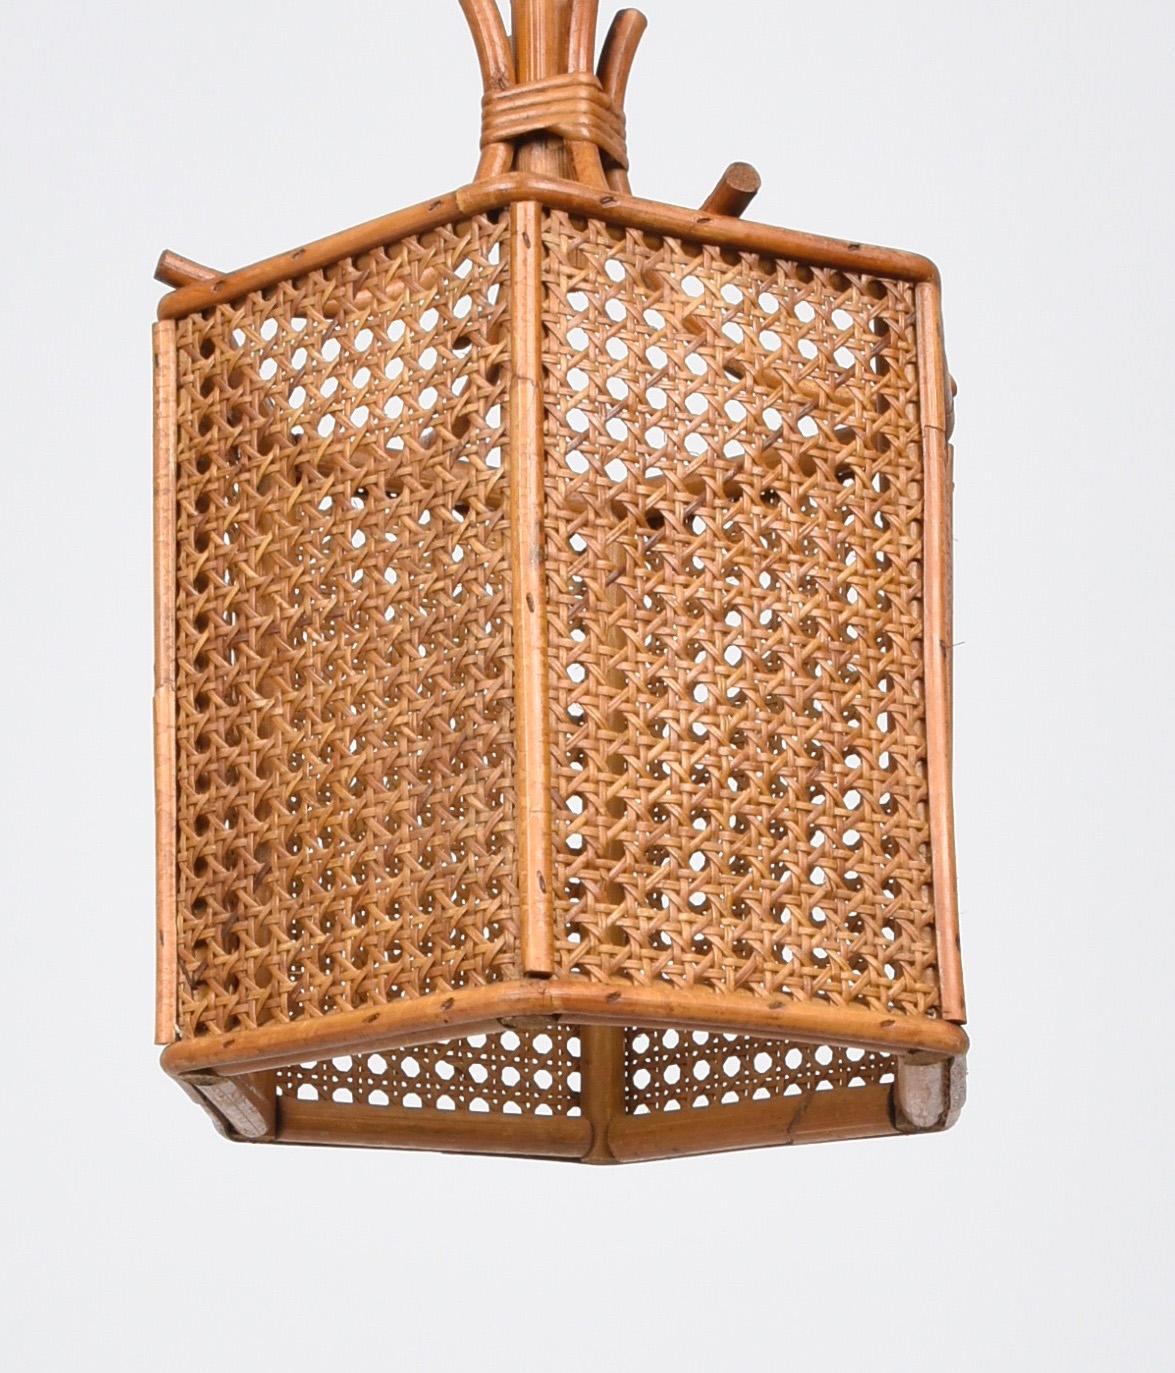 Wonderful hexagonal pendant rattan and wicker chandelier in the French Riviera style. This incredible piece was made in Italy in the 1960s.

This object is striking for its hexagonal bamboo shape and wicker cover structure.

This chandelier is